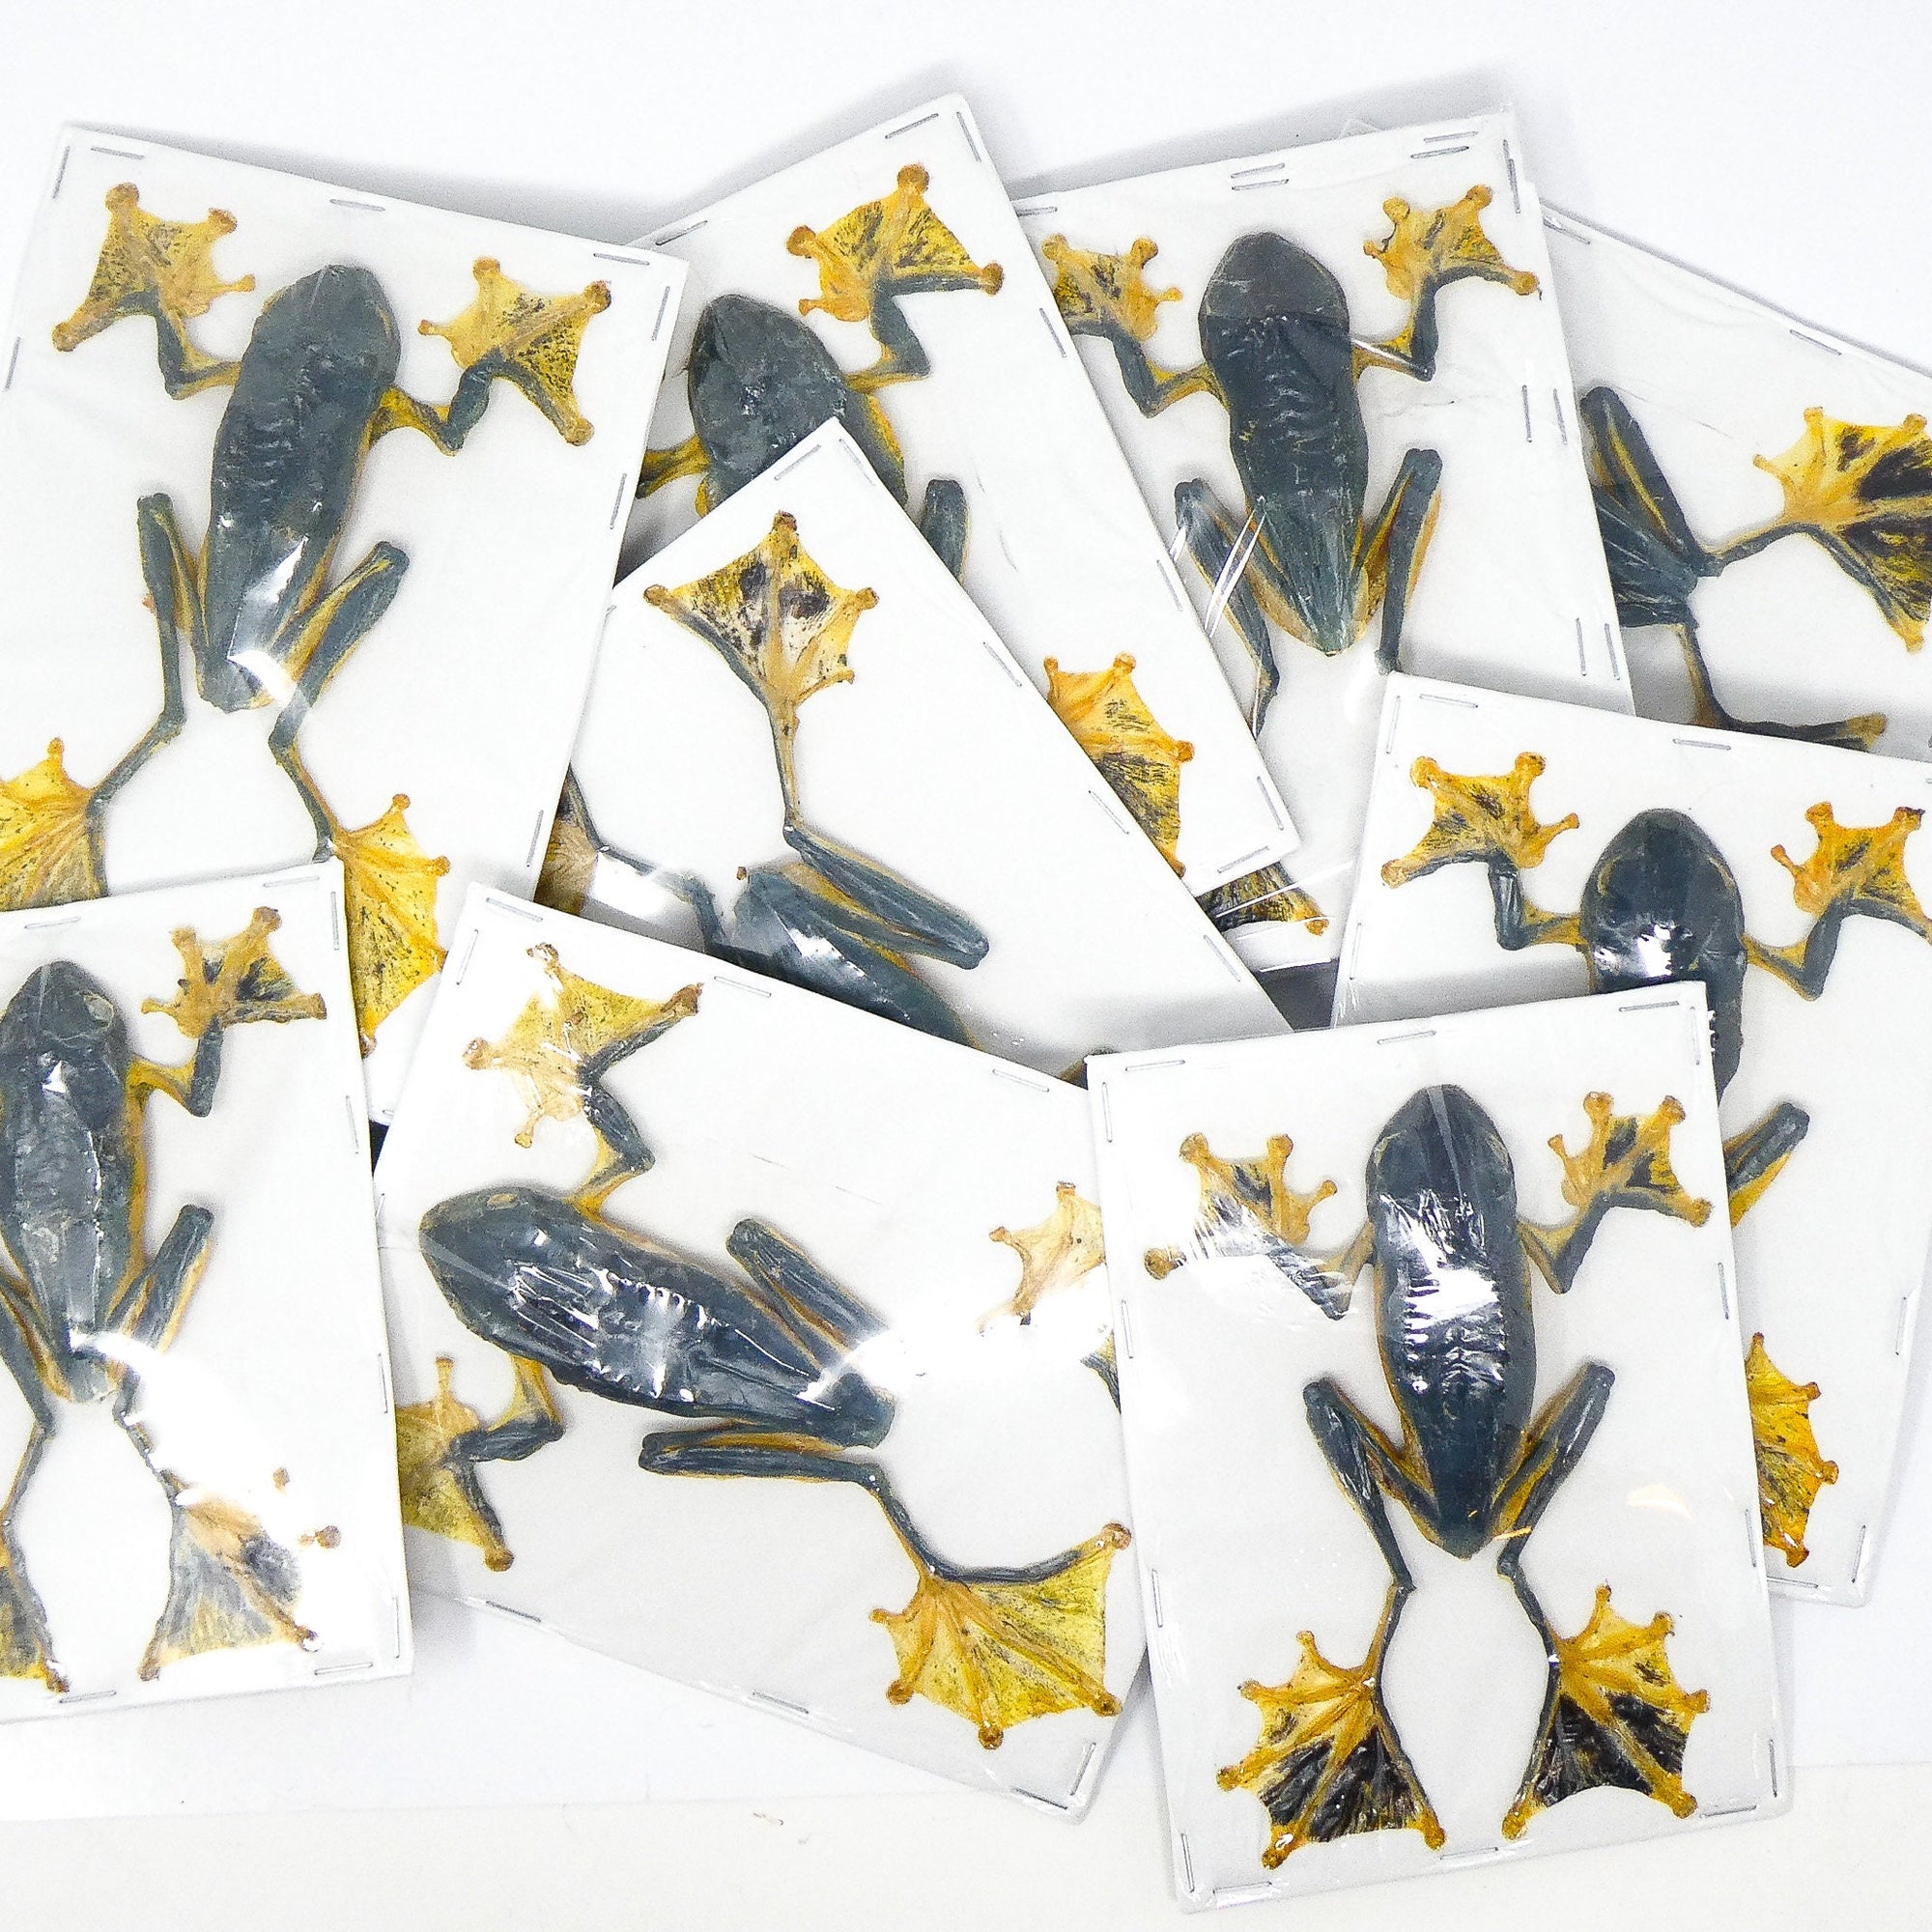 Pack of 10 Reinwardt's Tree Frogs (Rhacophorus Reinwardtii) 3.5 Inches, A1 Real Dry-Preserved Specimens Taxidermy